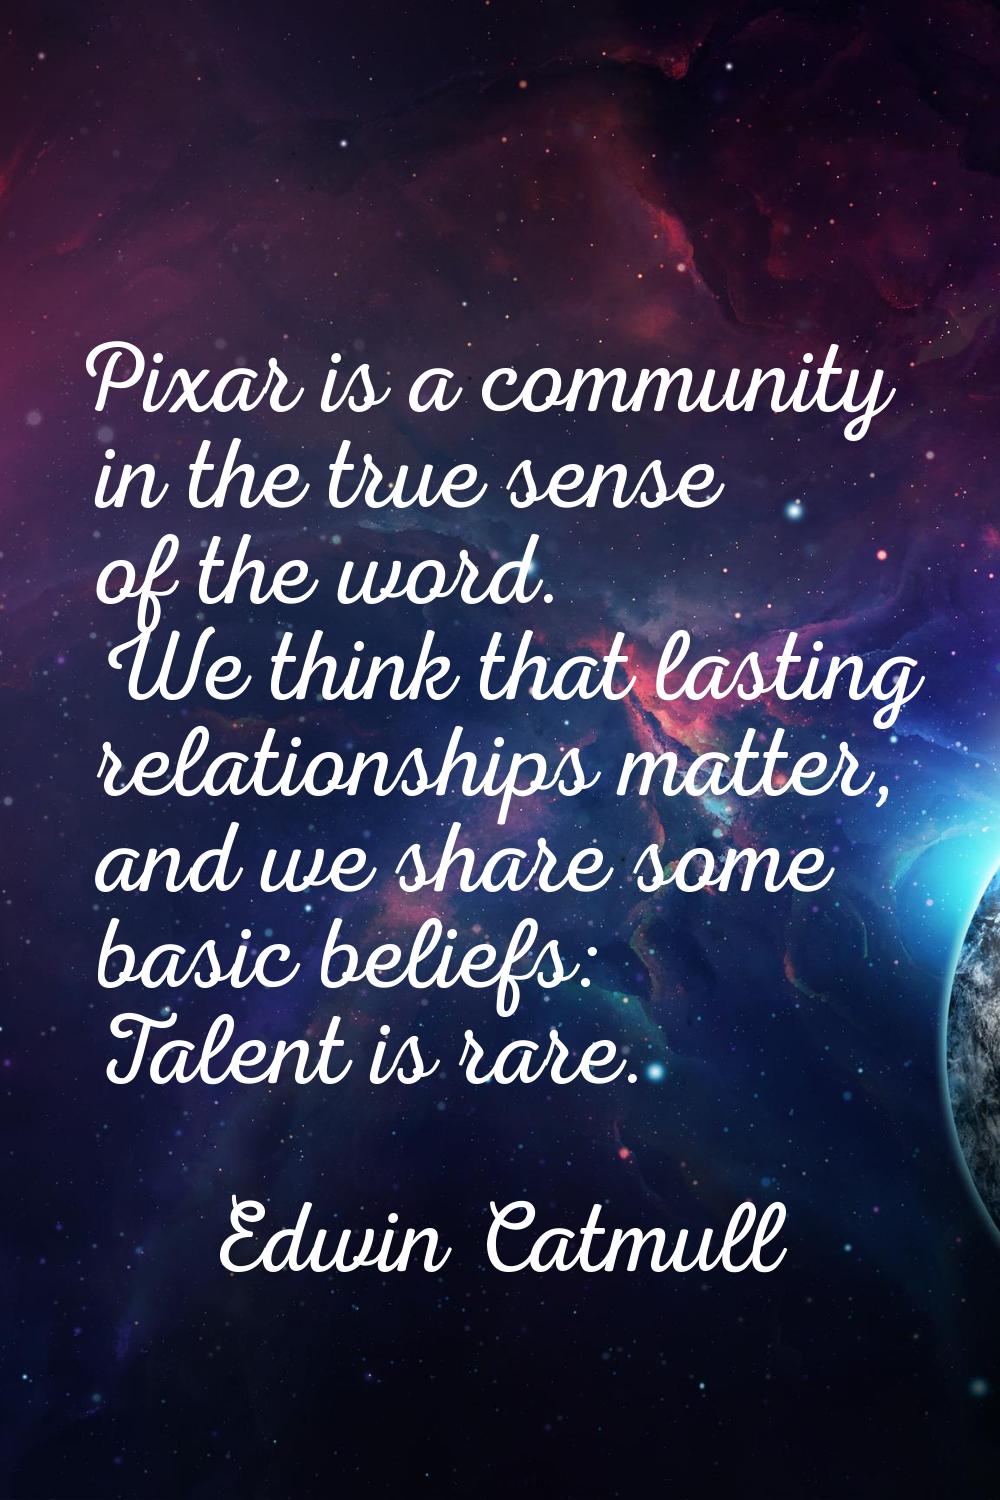 Pixar is a community in the true sense of the word. We think that lasting relationships matter, and